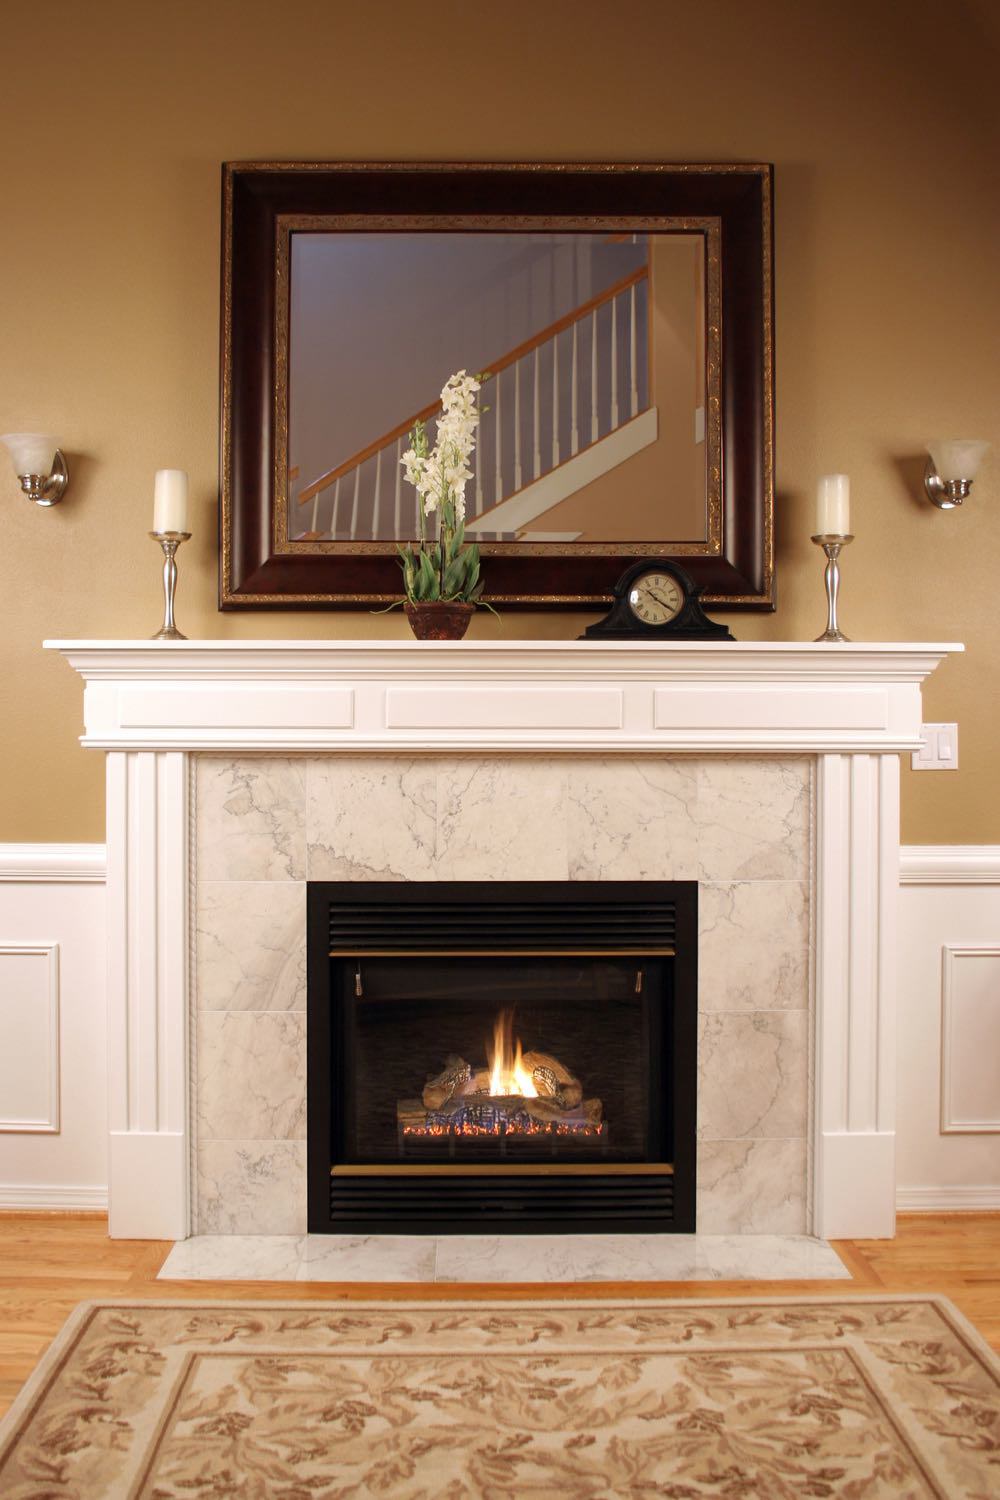 Hearth Rugs Can Add Elegance and Protection